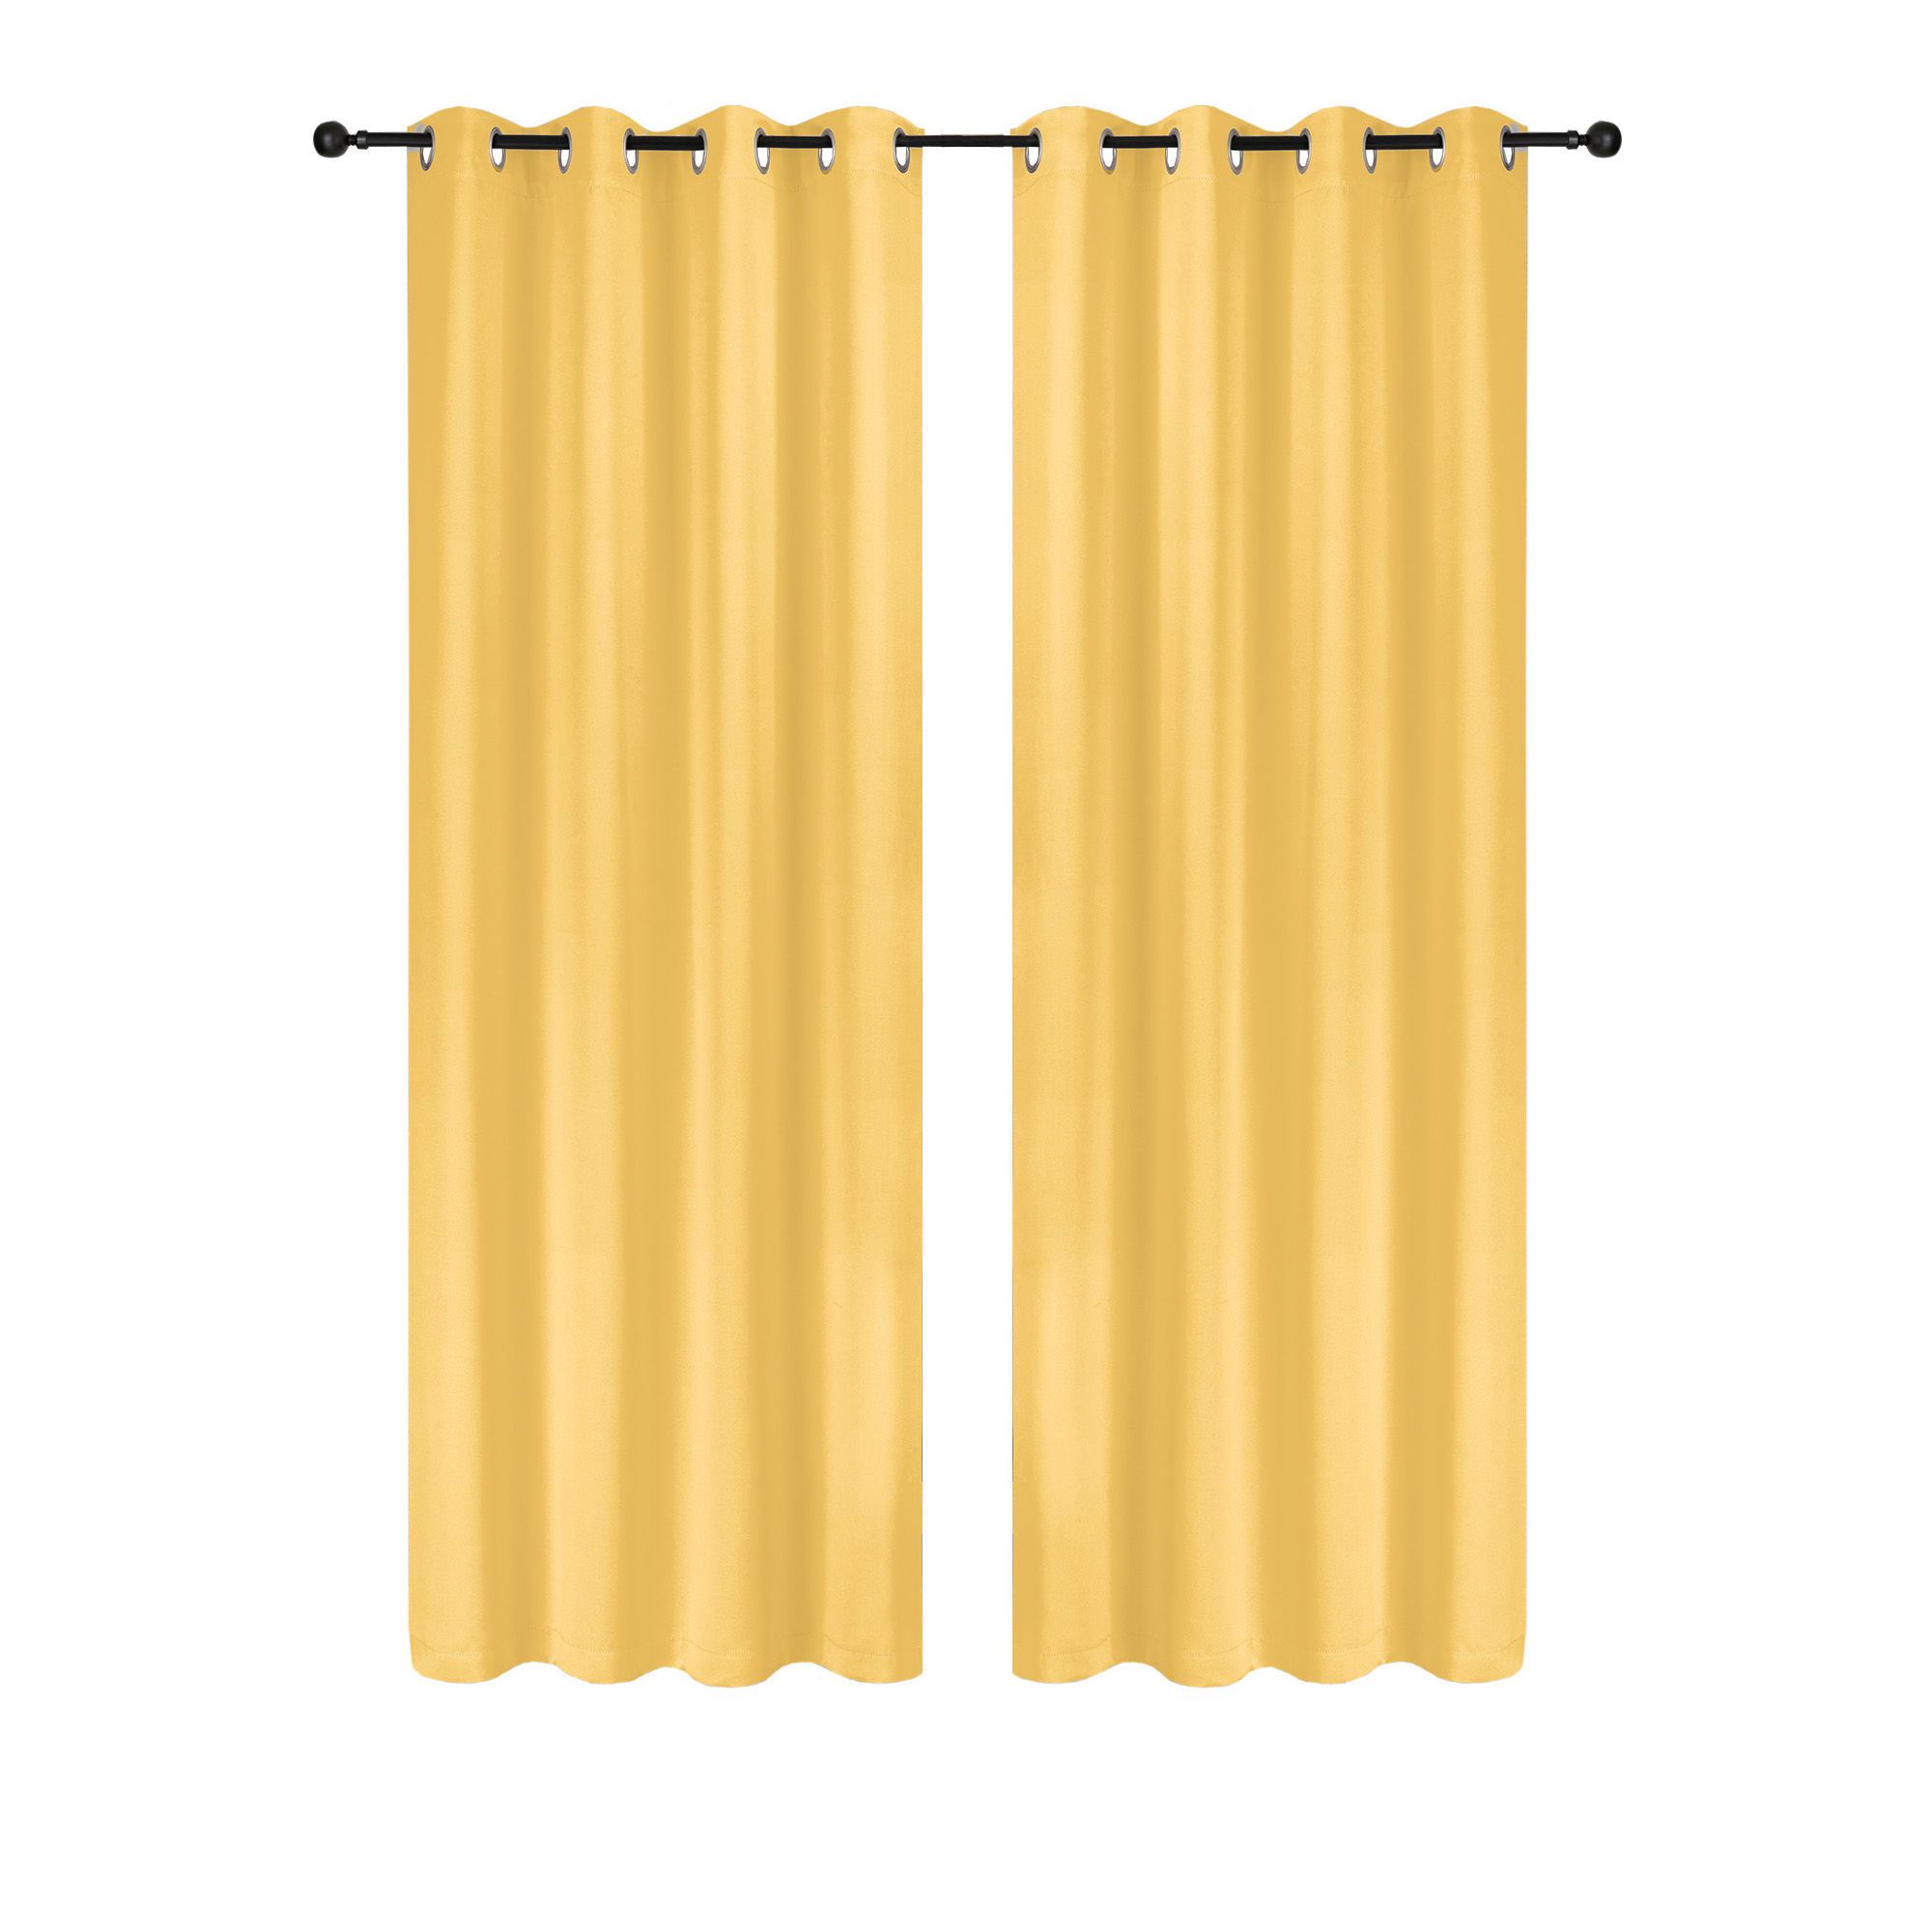 Total Blackout Curtain with Metal Grommets 84 L - Mustard from SAFDIE | BMR